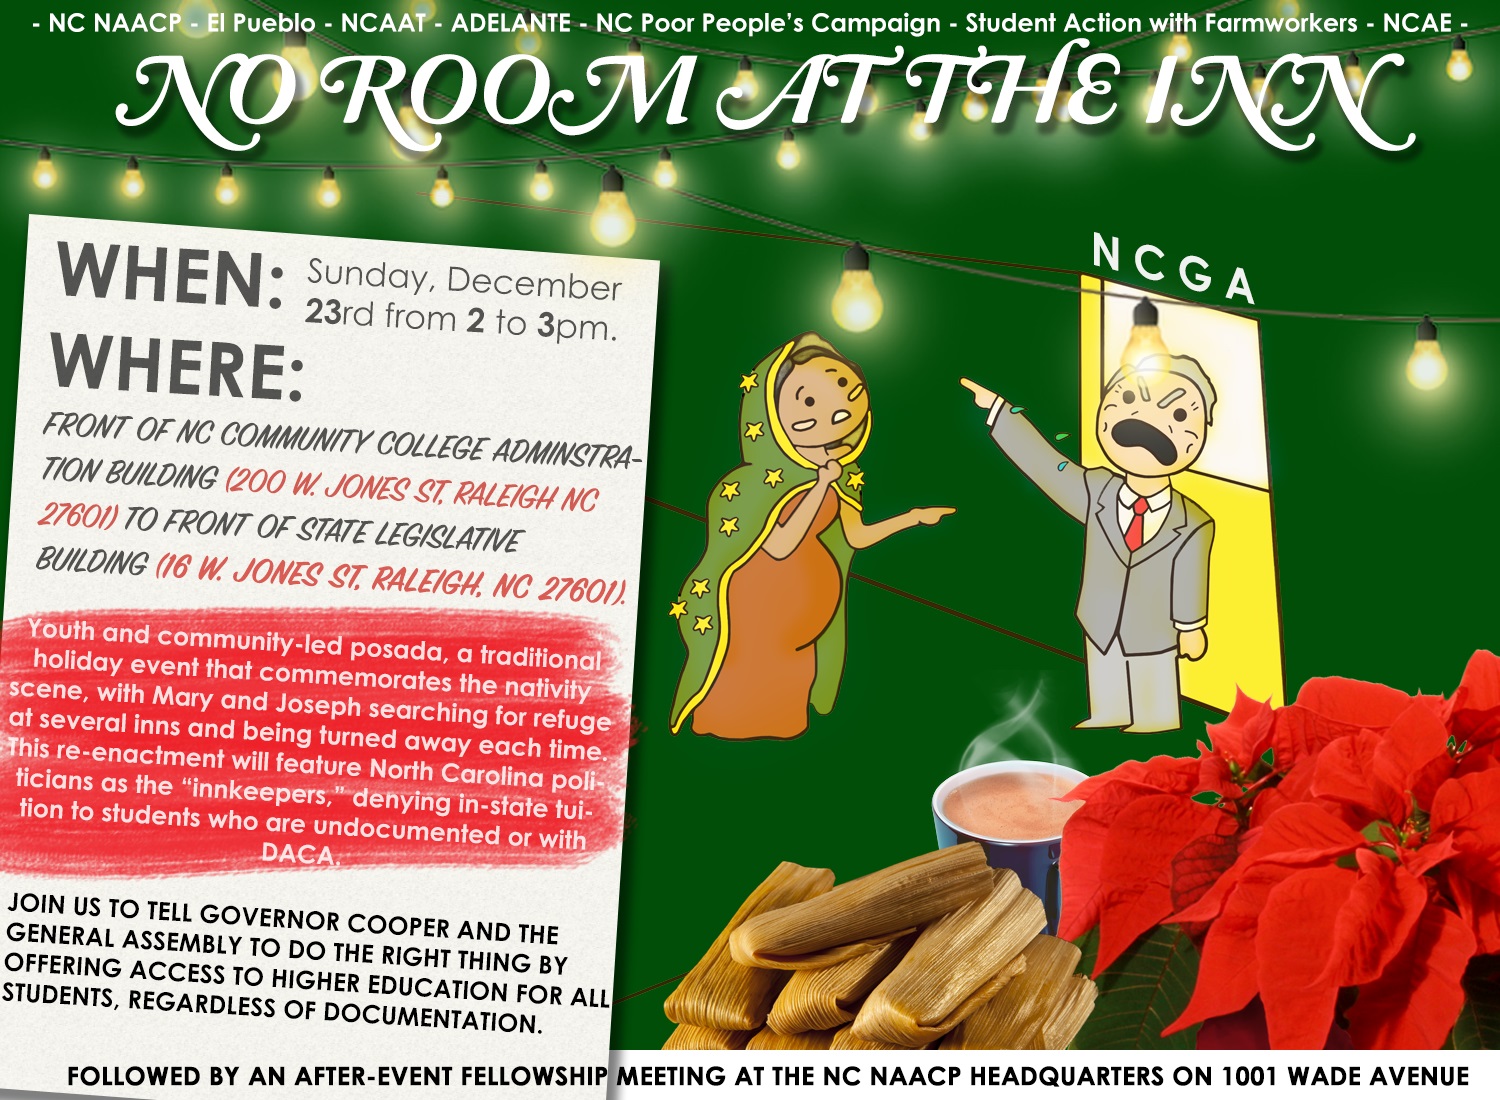 No Room At the Inn Flyer with information